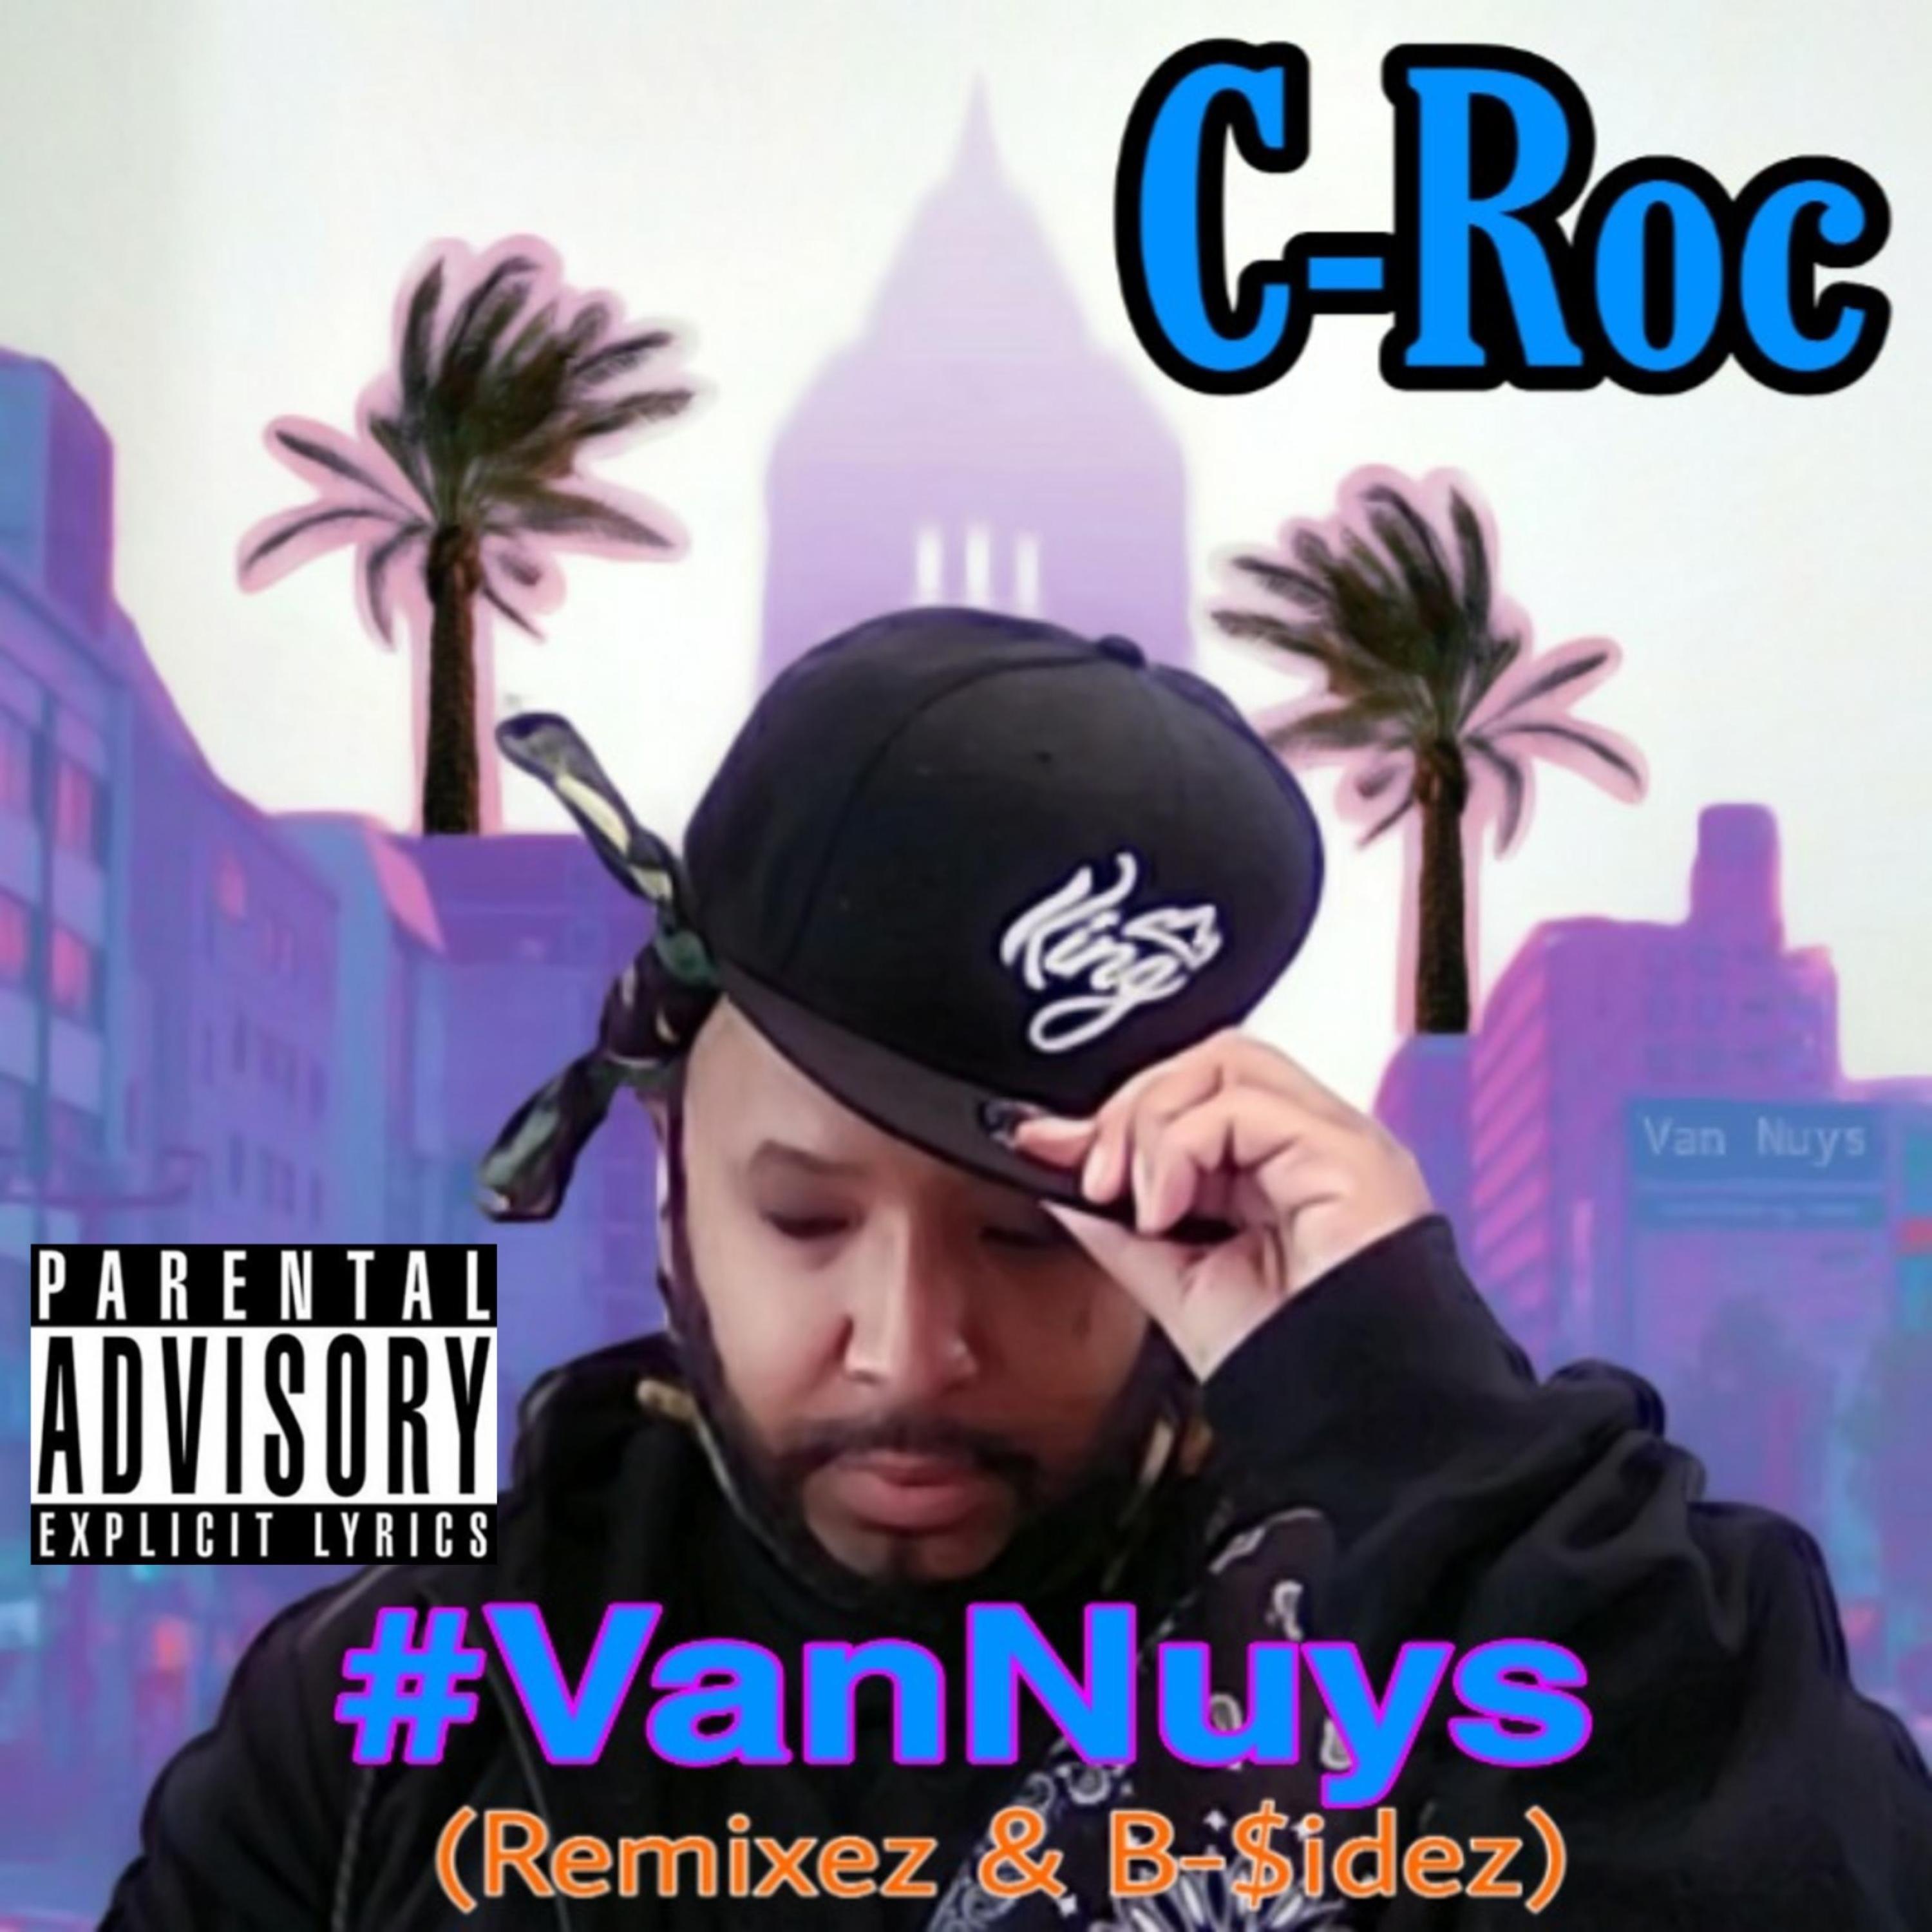 C-Roc from 818 - Fake Luv (Remix)